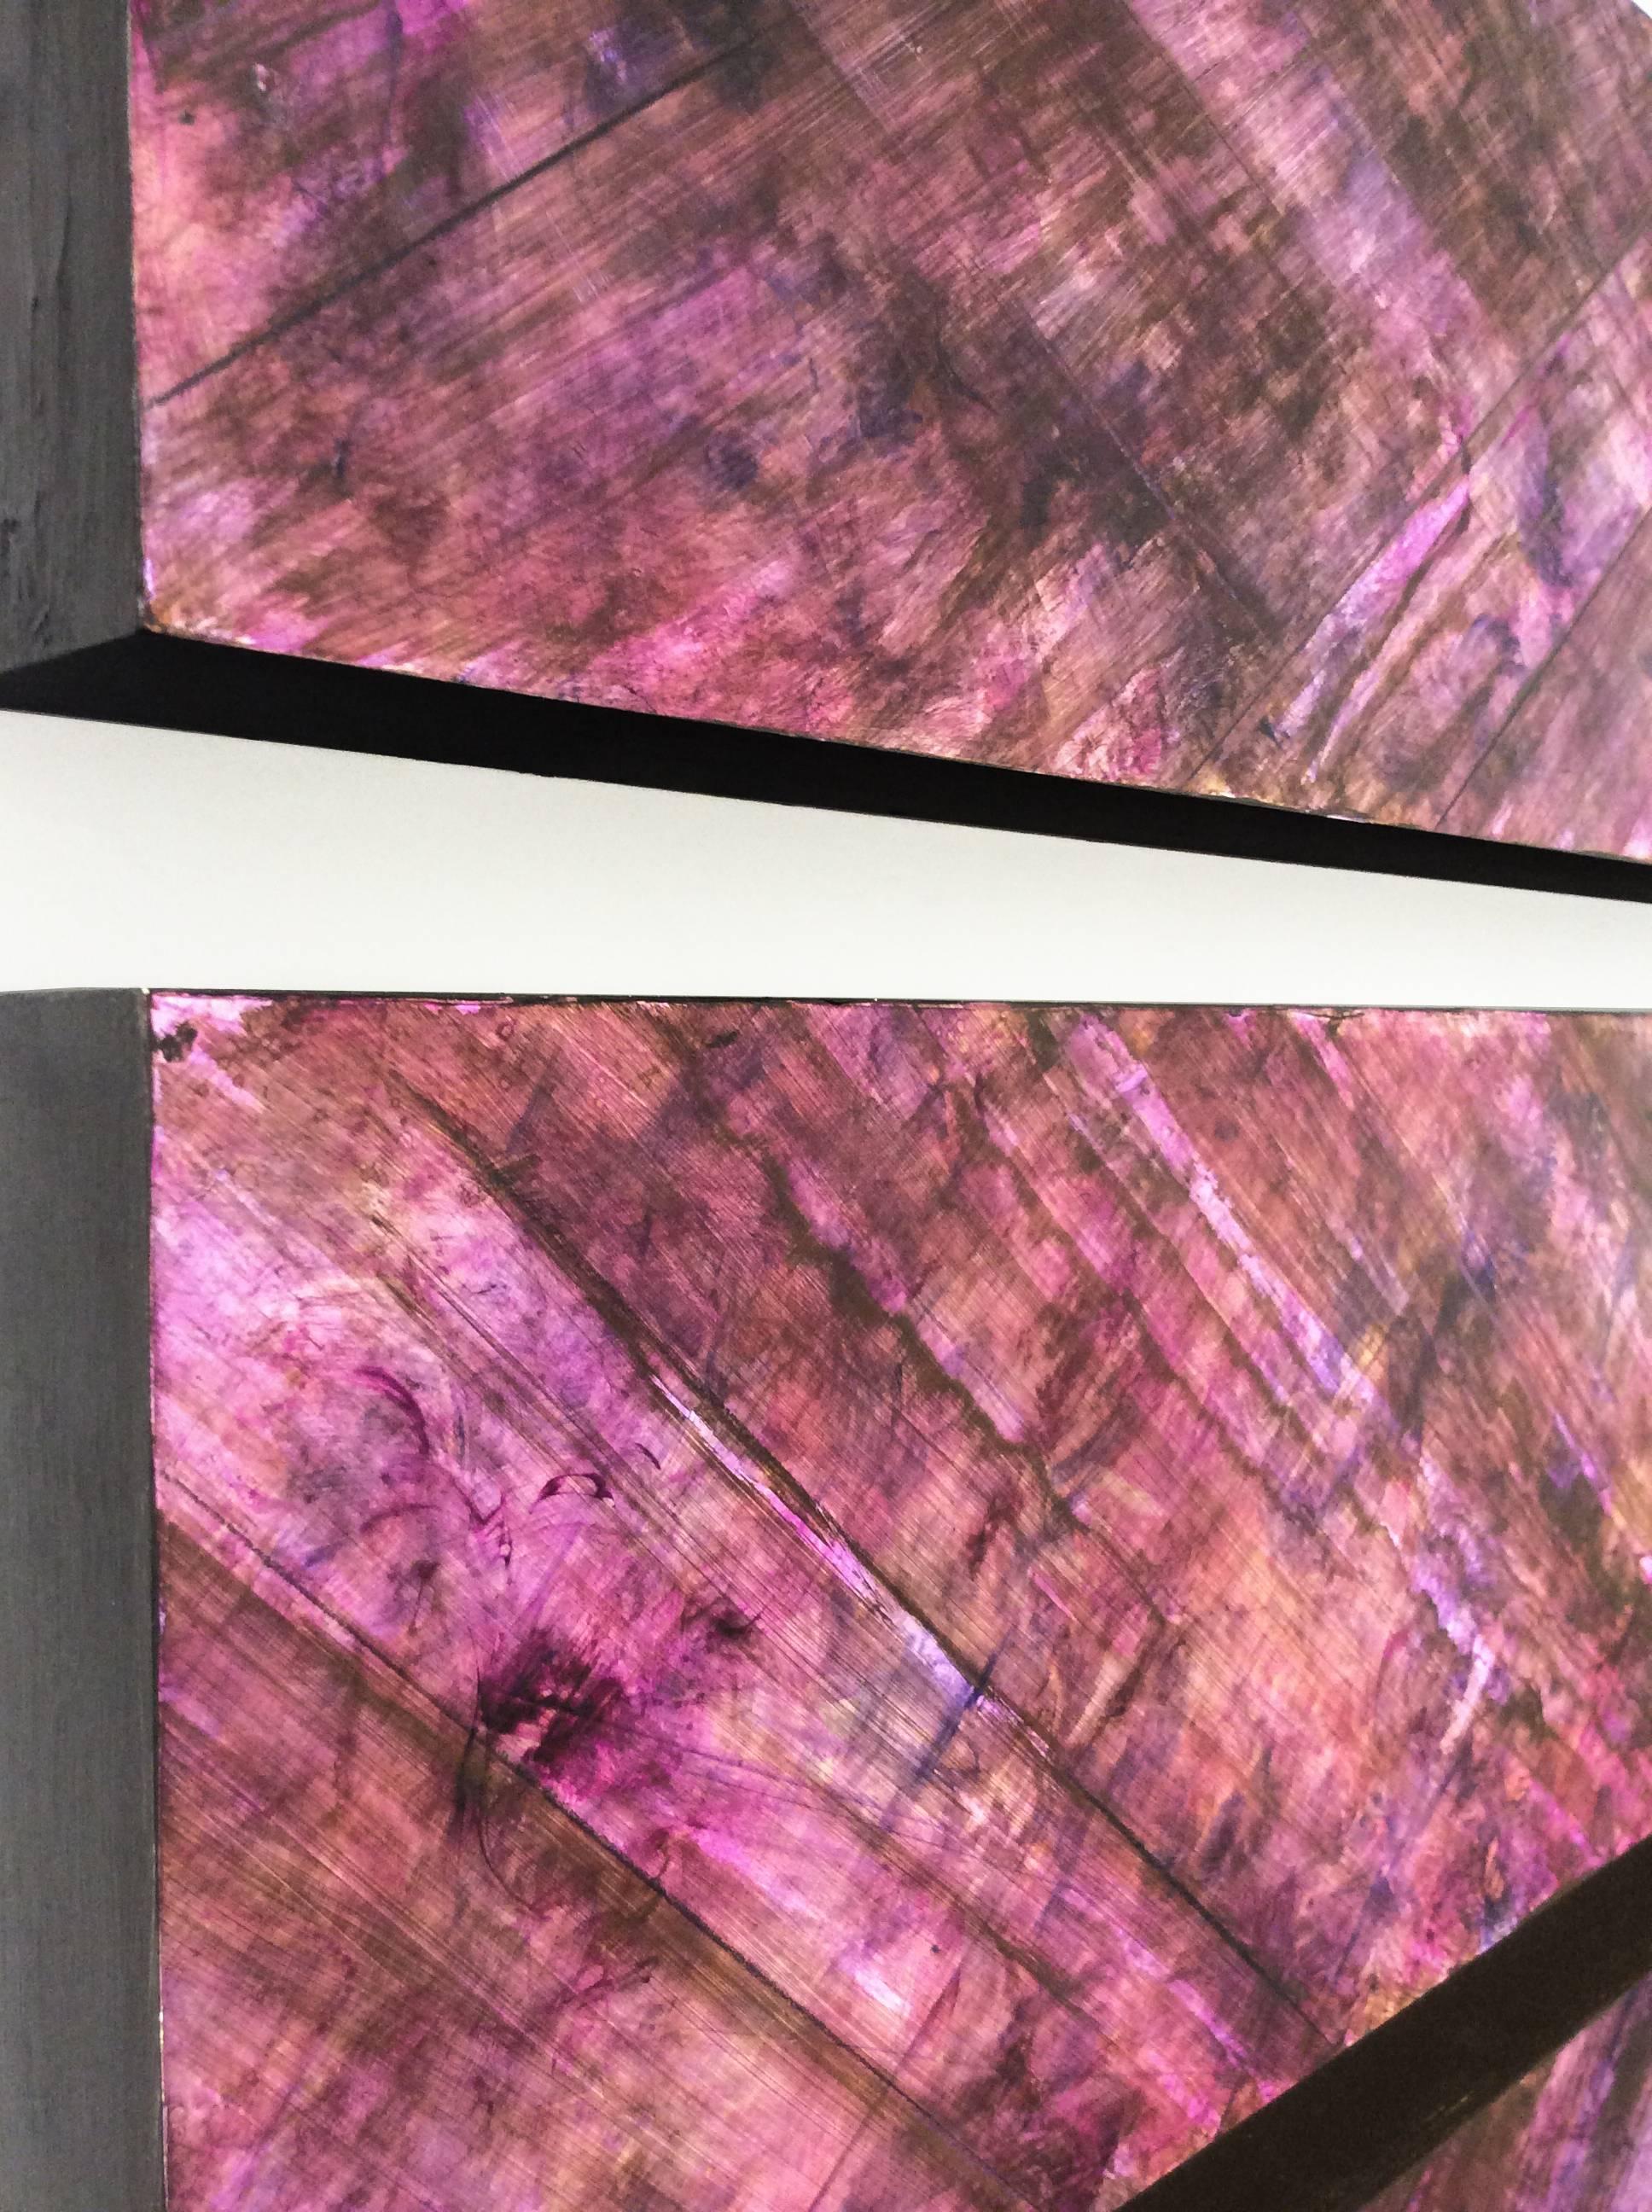 Acrylic on 3 wood panels
Each panel measures 8 x 24 x 2 inches
Suggested installation is 1-2 inches between panels, which can be oriented in any direction
Overall measurement for pictured install: 30 x 24 x 2 inches

This minimalist, non-objective